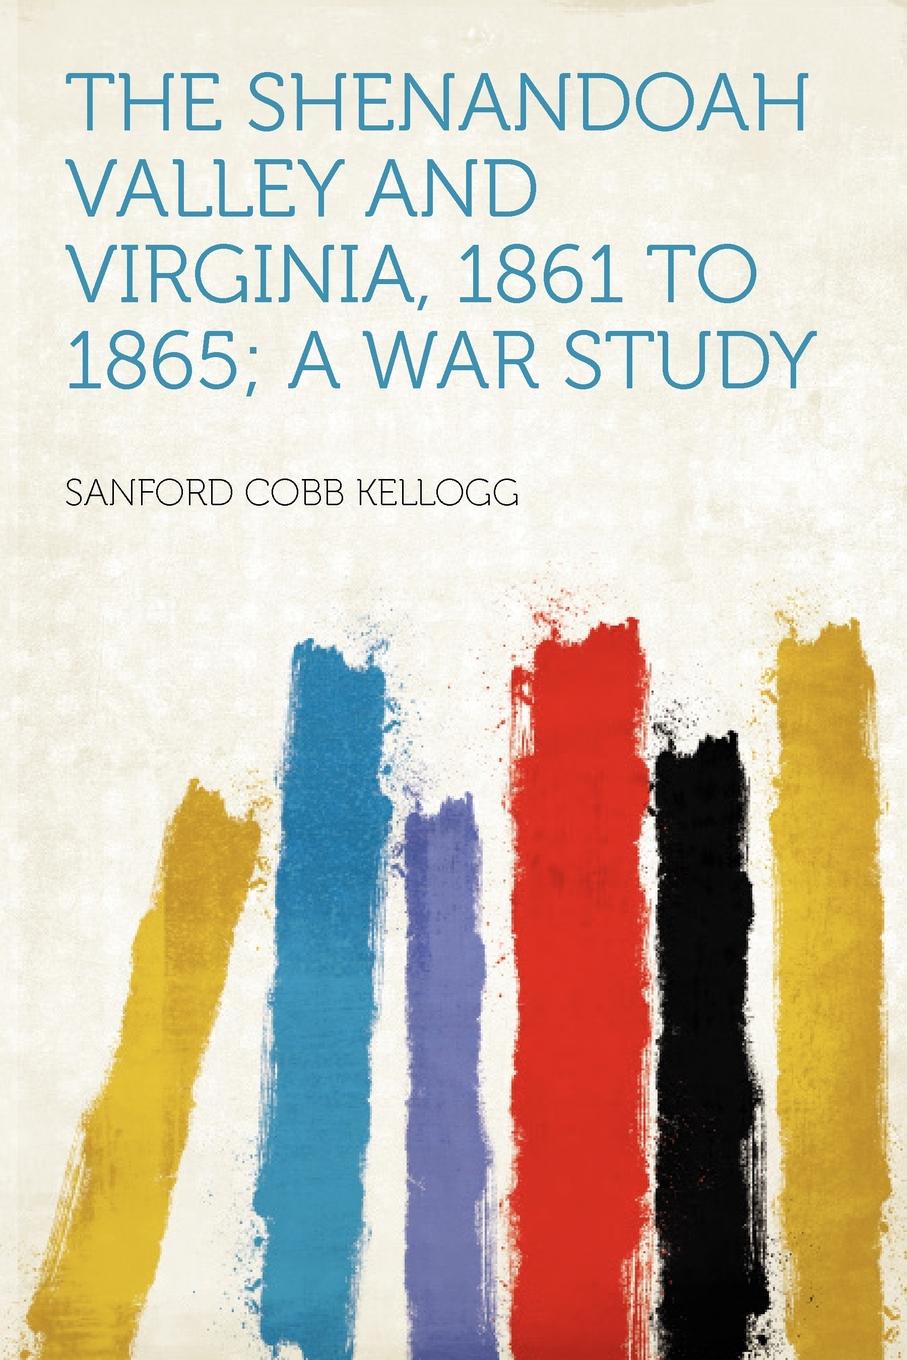 The Shenandoah Valley and Virginia, 1861 to 1865; a War Study